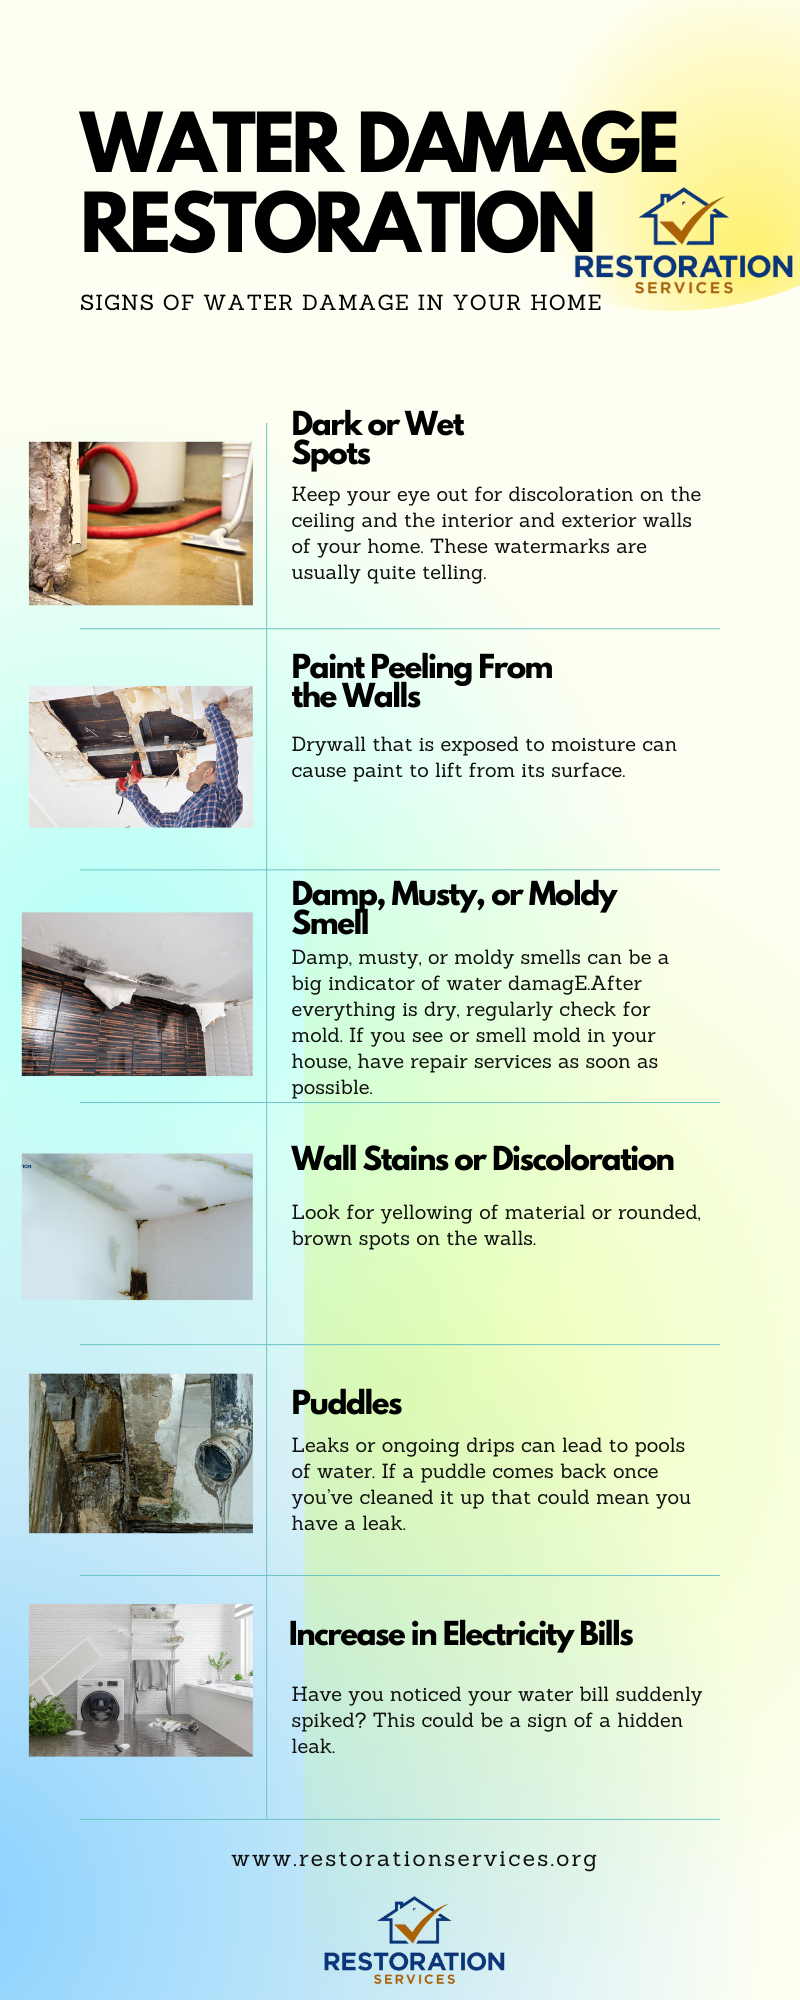 SIGNS OF WATER DAMAGE